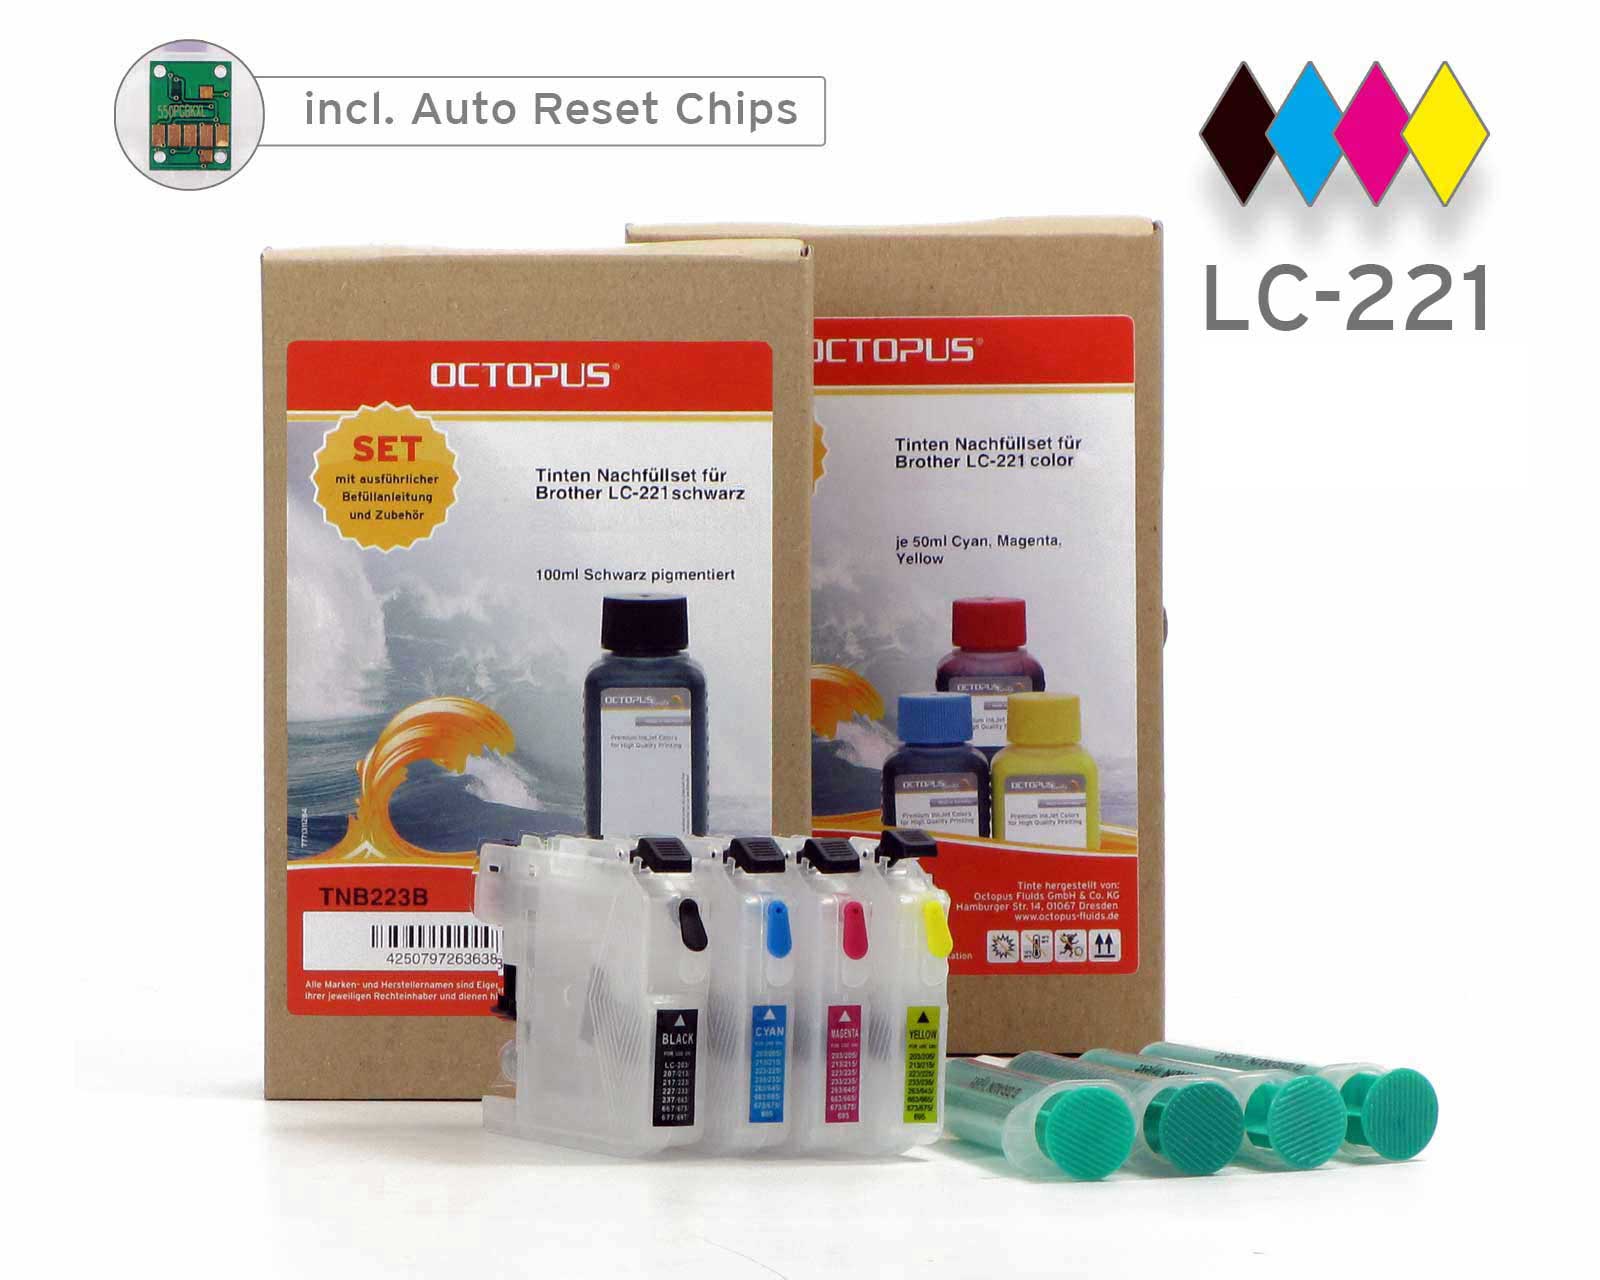 Set of refillable cartridges compatible with Brother LC-221, LC-223 with ink refill kits